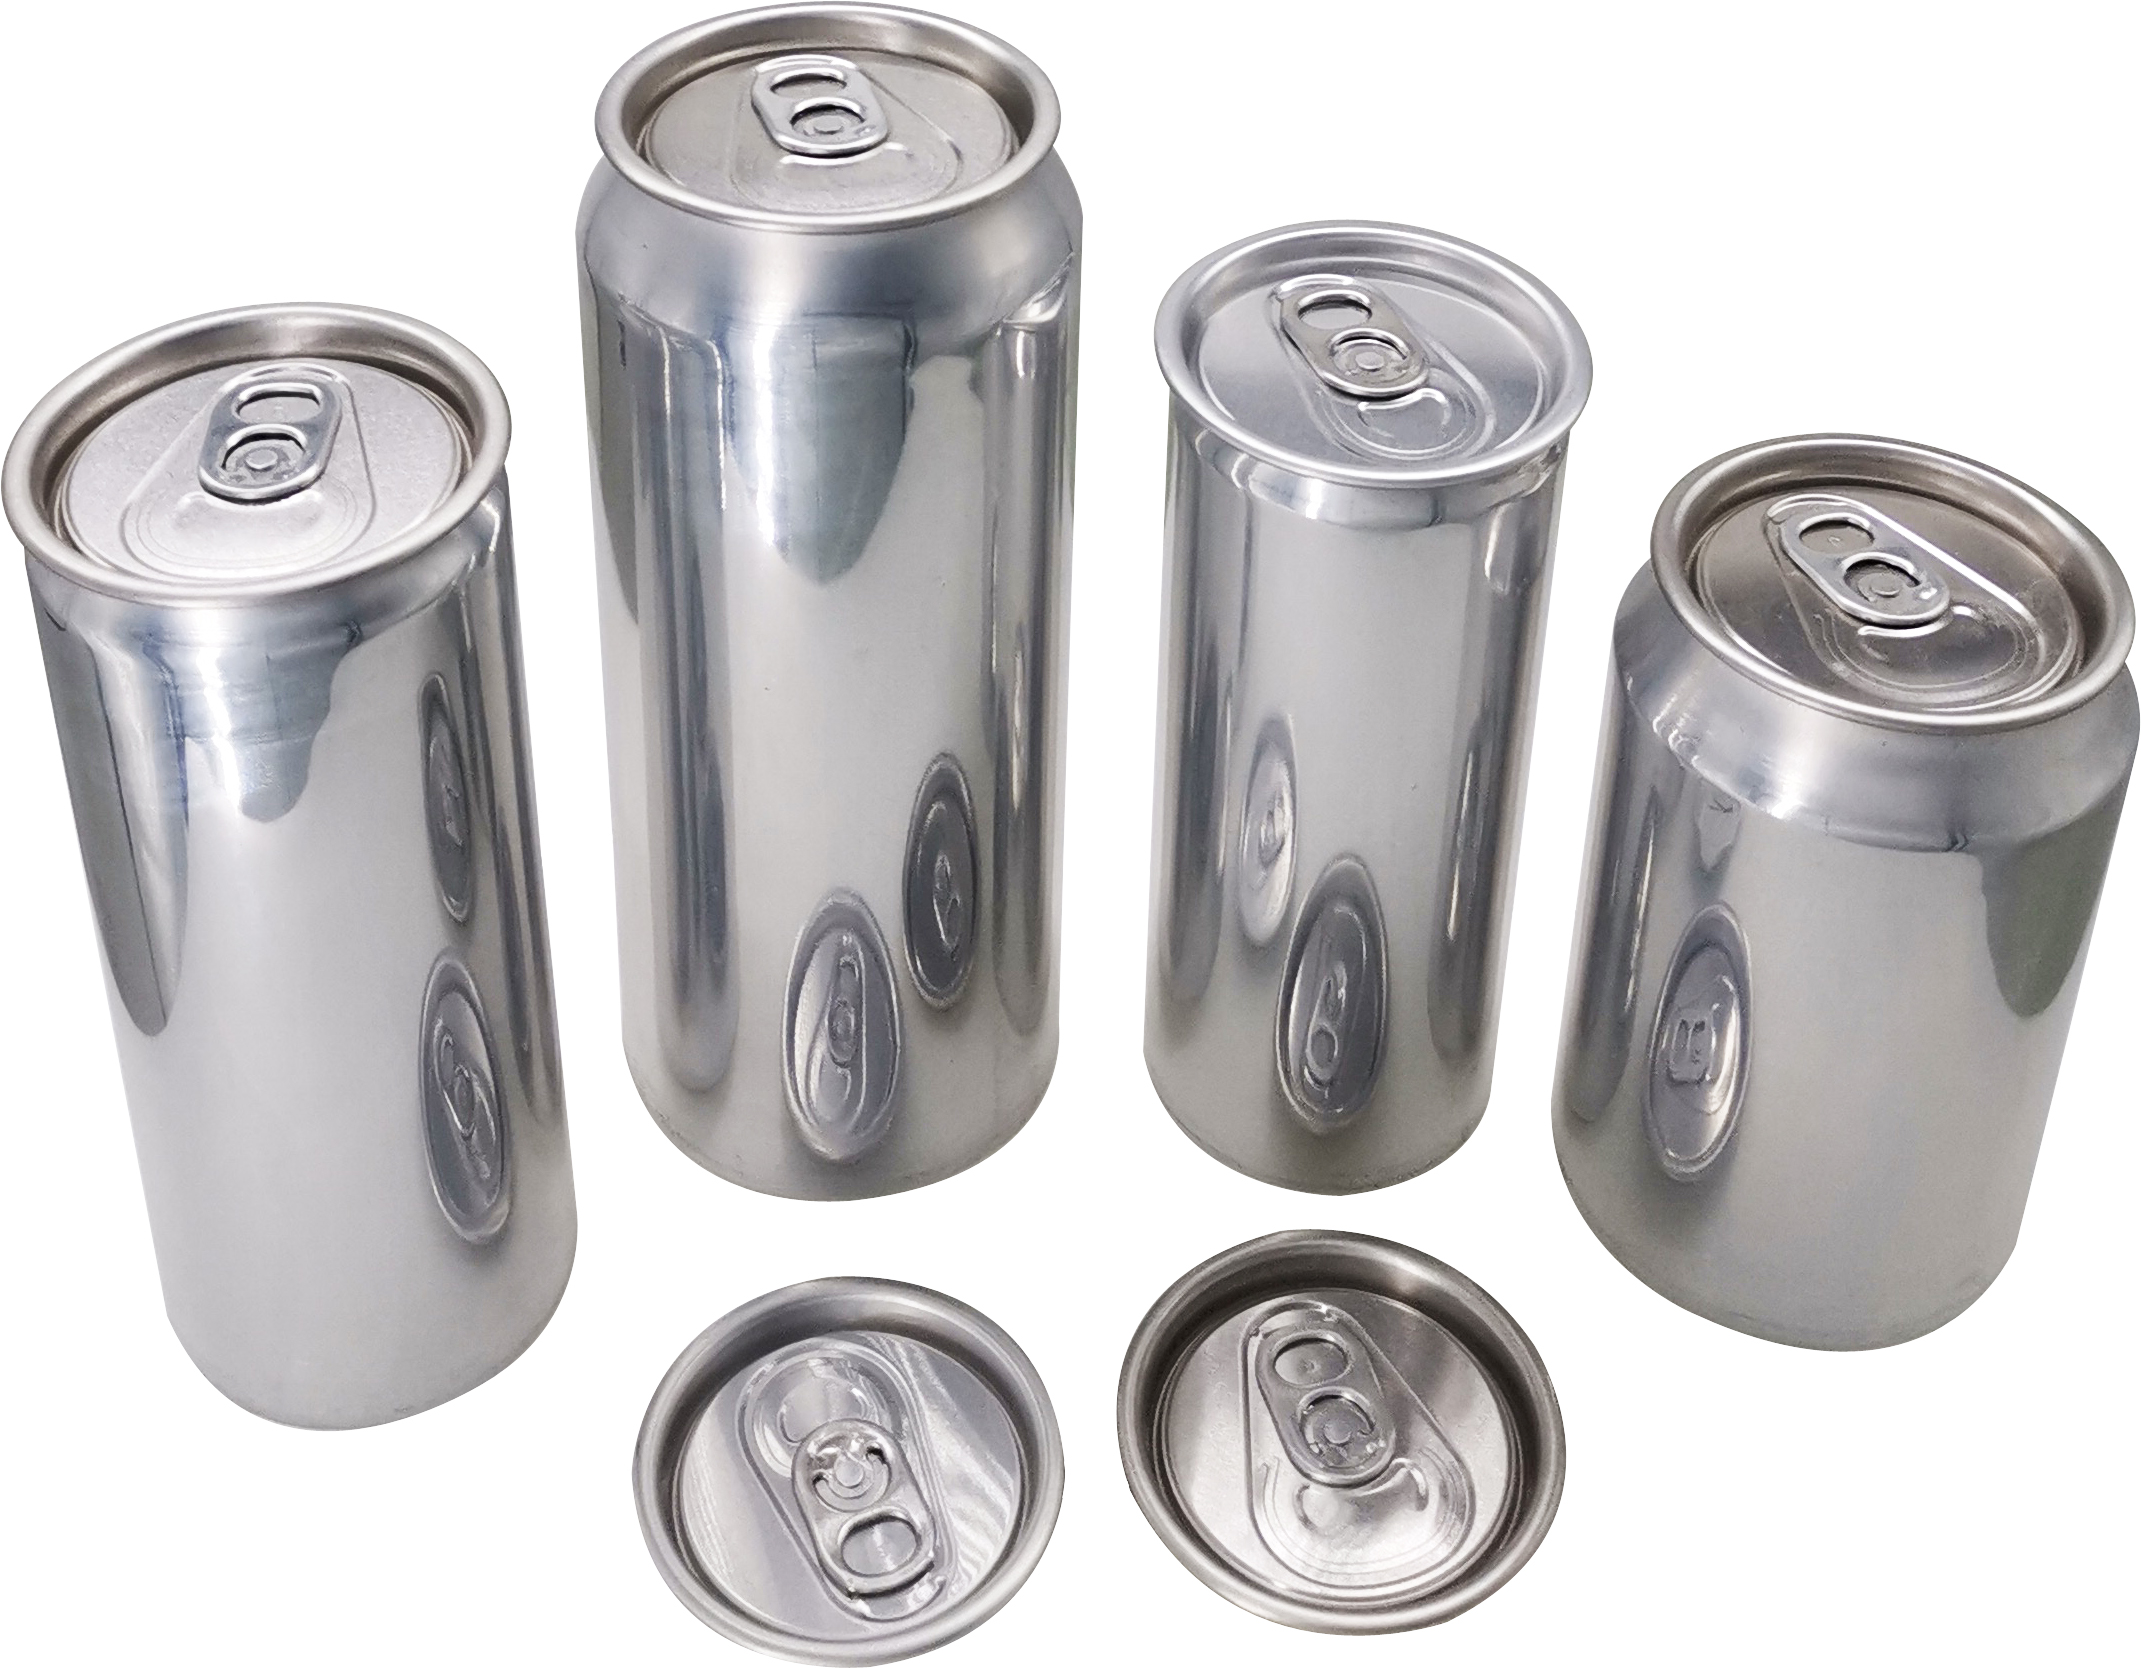 metal containers with lids for storage